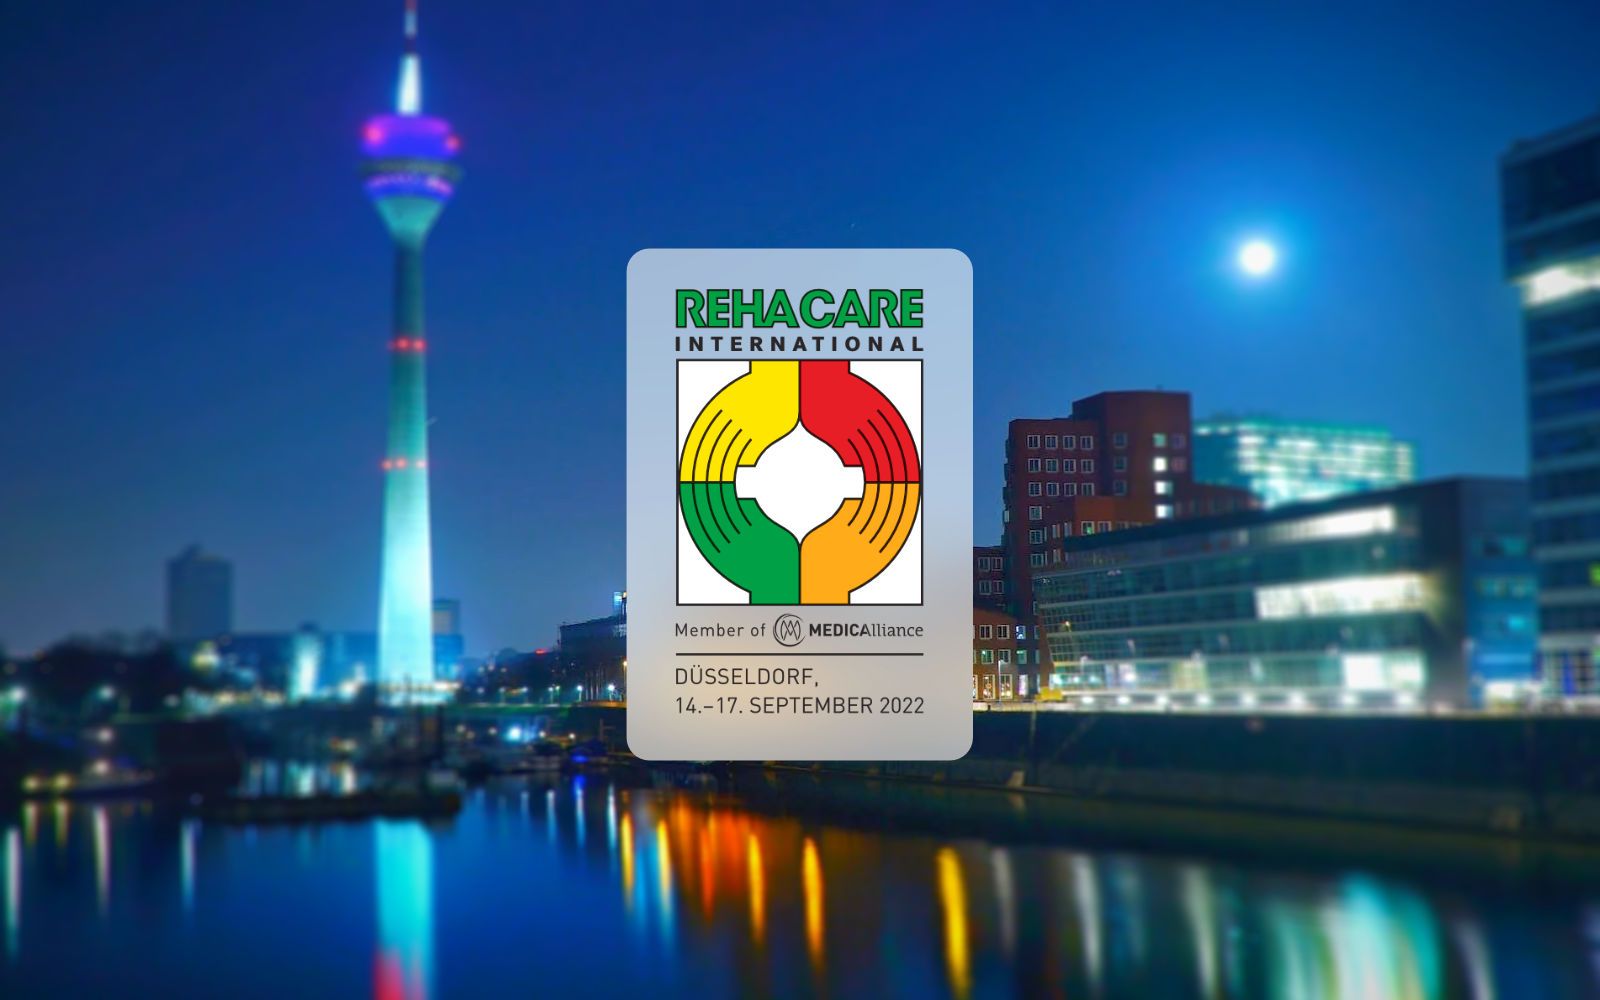 A picture of Düsseldorf and the Rehacare 2022 logo.